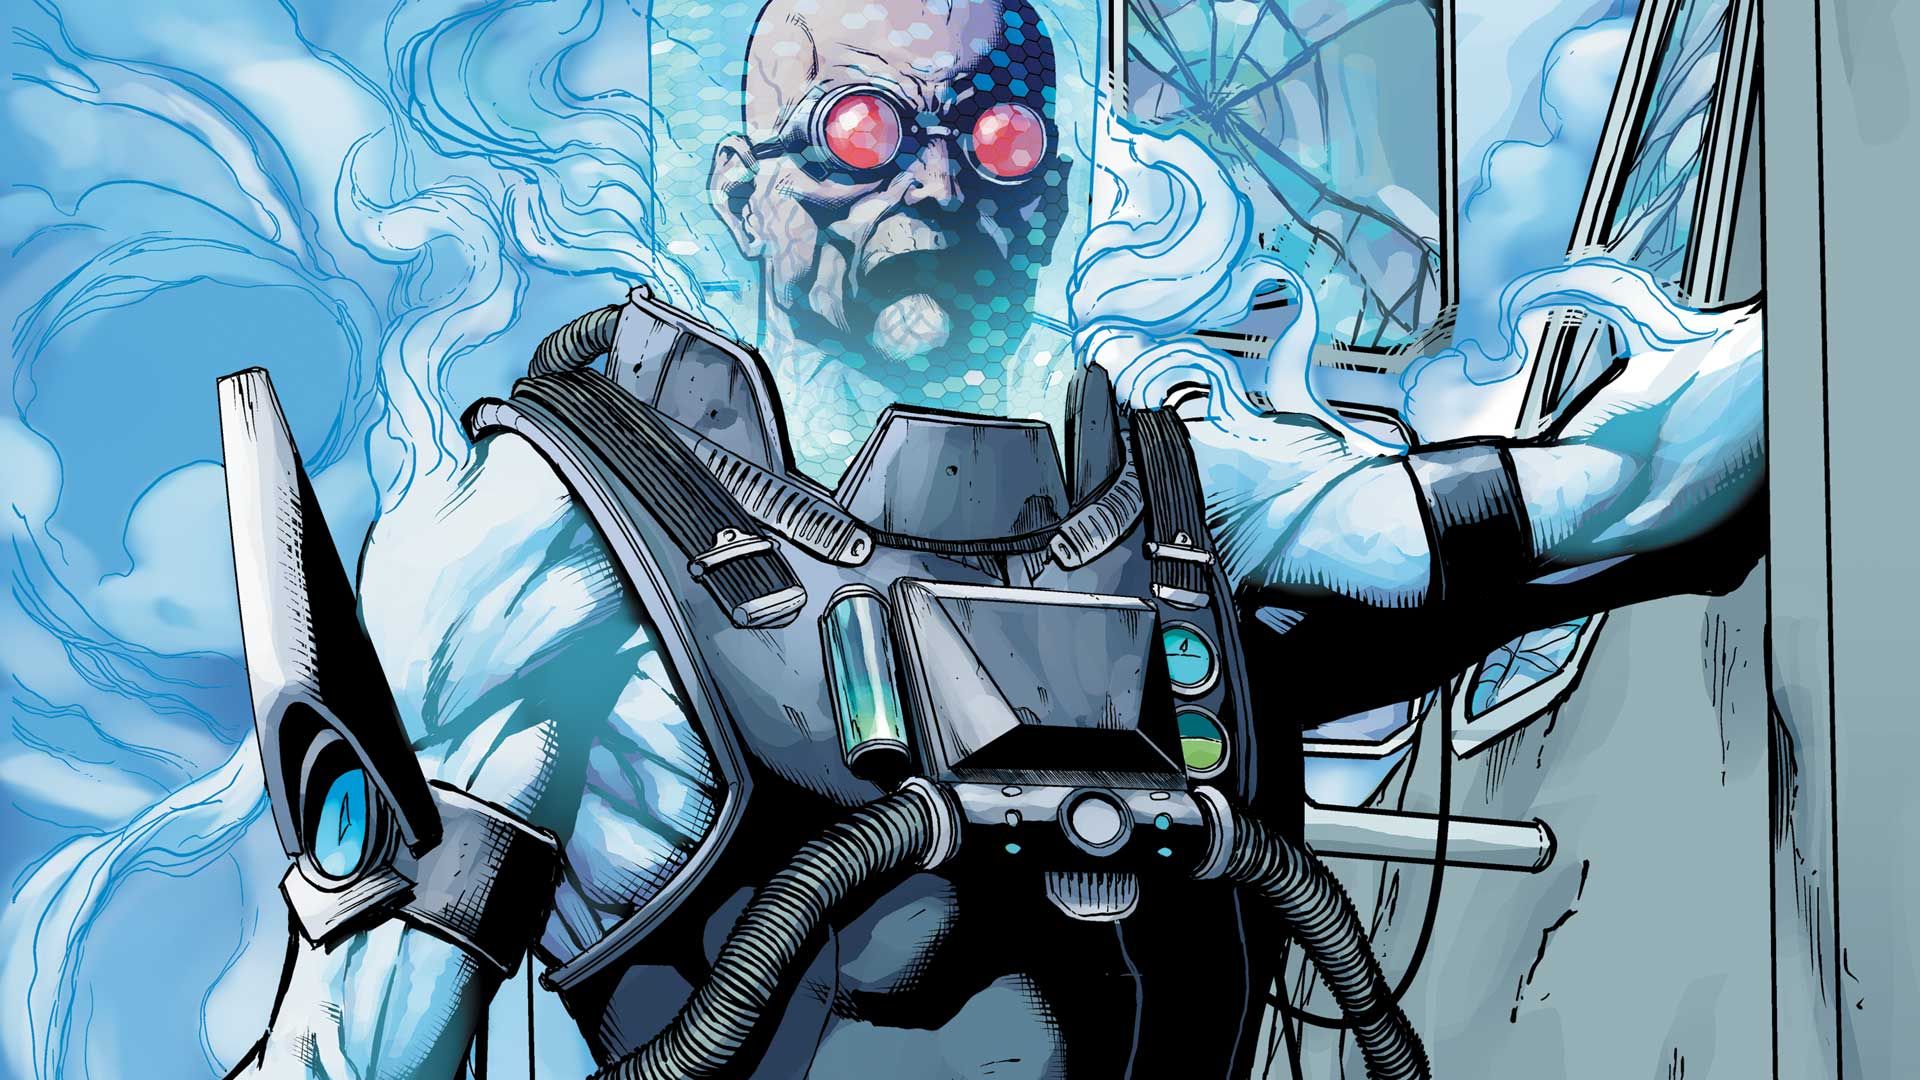 Mister Freeze as depicted in DC comics